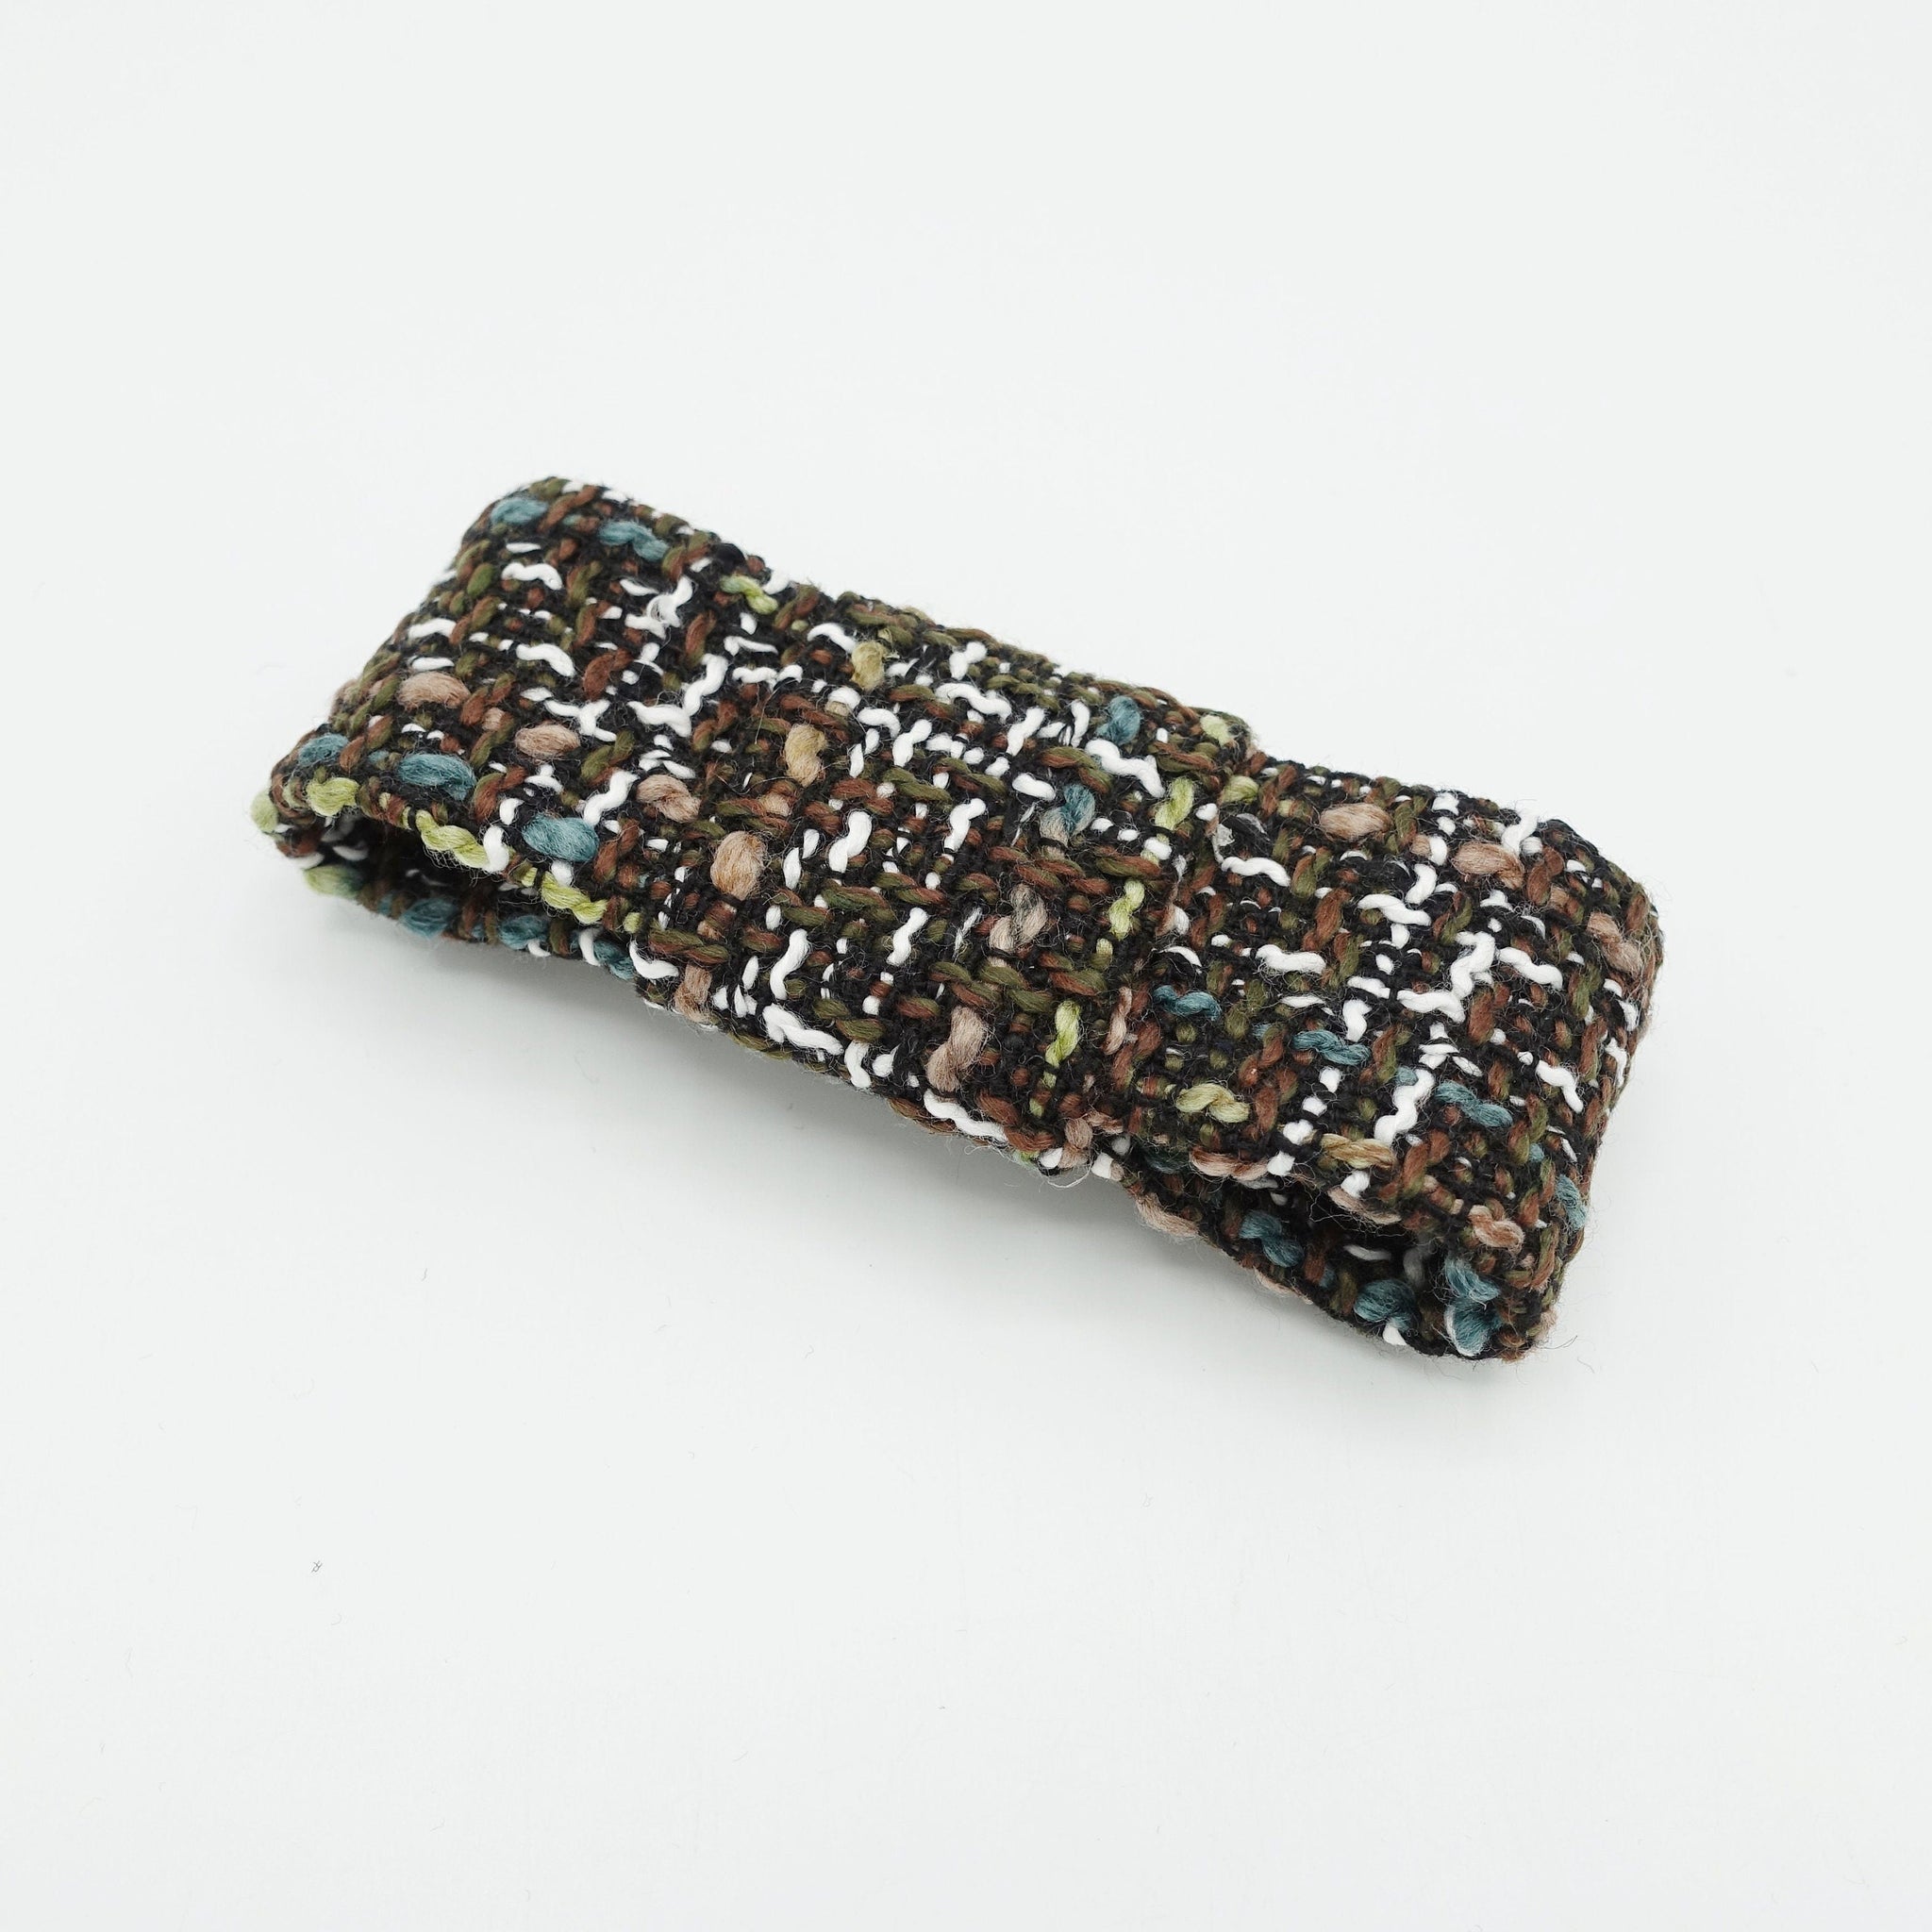 veryshine.com Barrette (Bow) tweed hair bow flat style french barrette Autumn Winter hair accessory for women